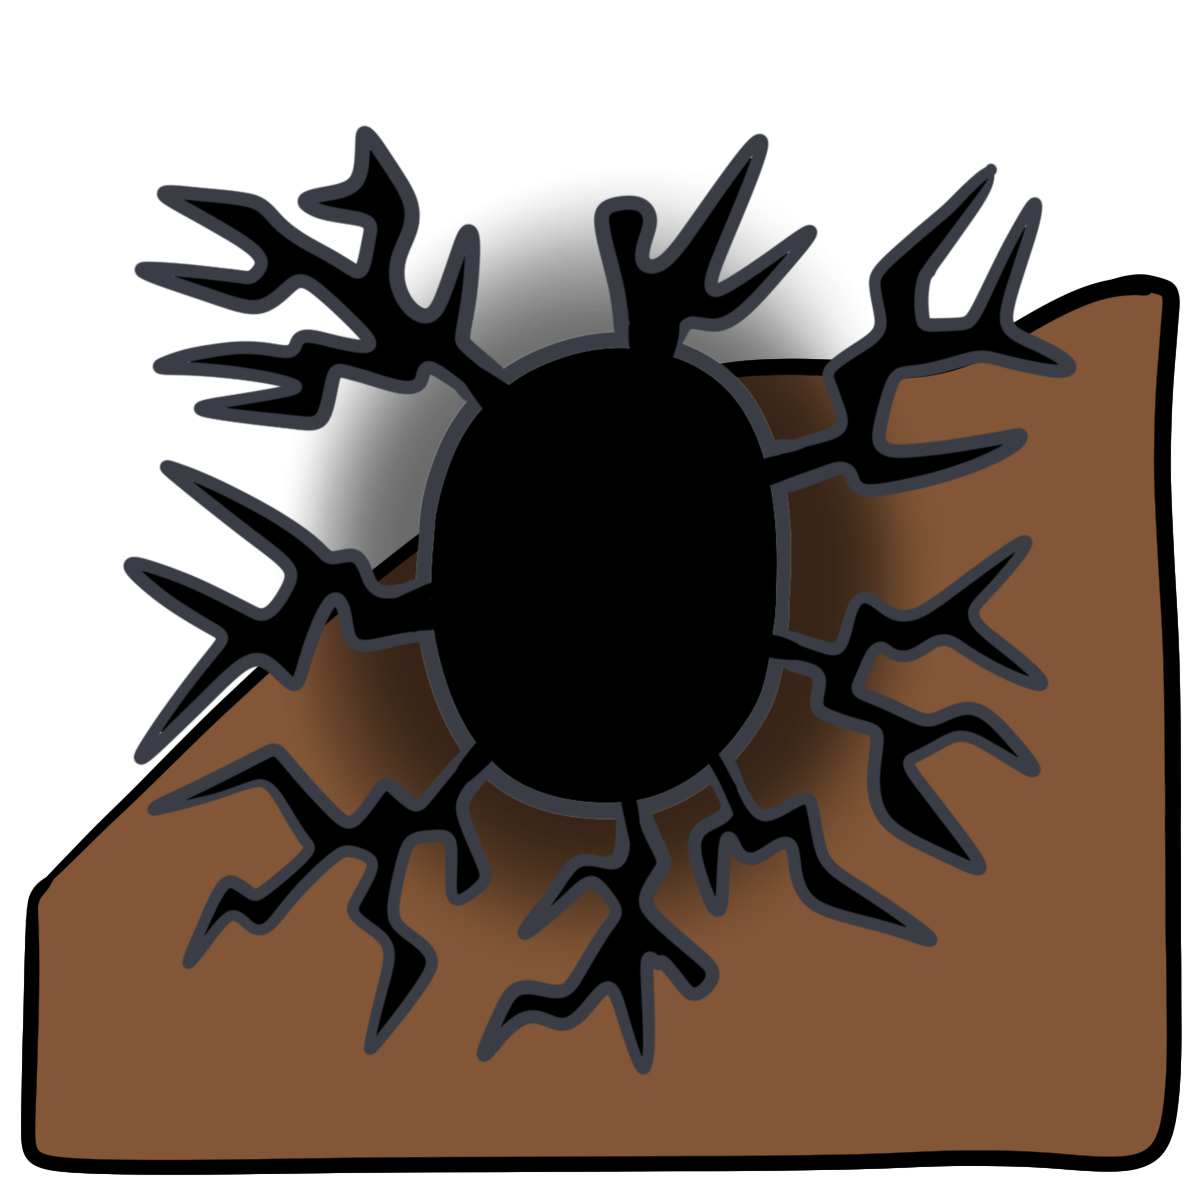 A black glowing oval with branching pointy lines coming from its sides. Curved medium brown skin fills the bottom half of the background.